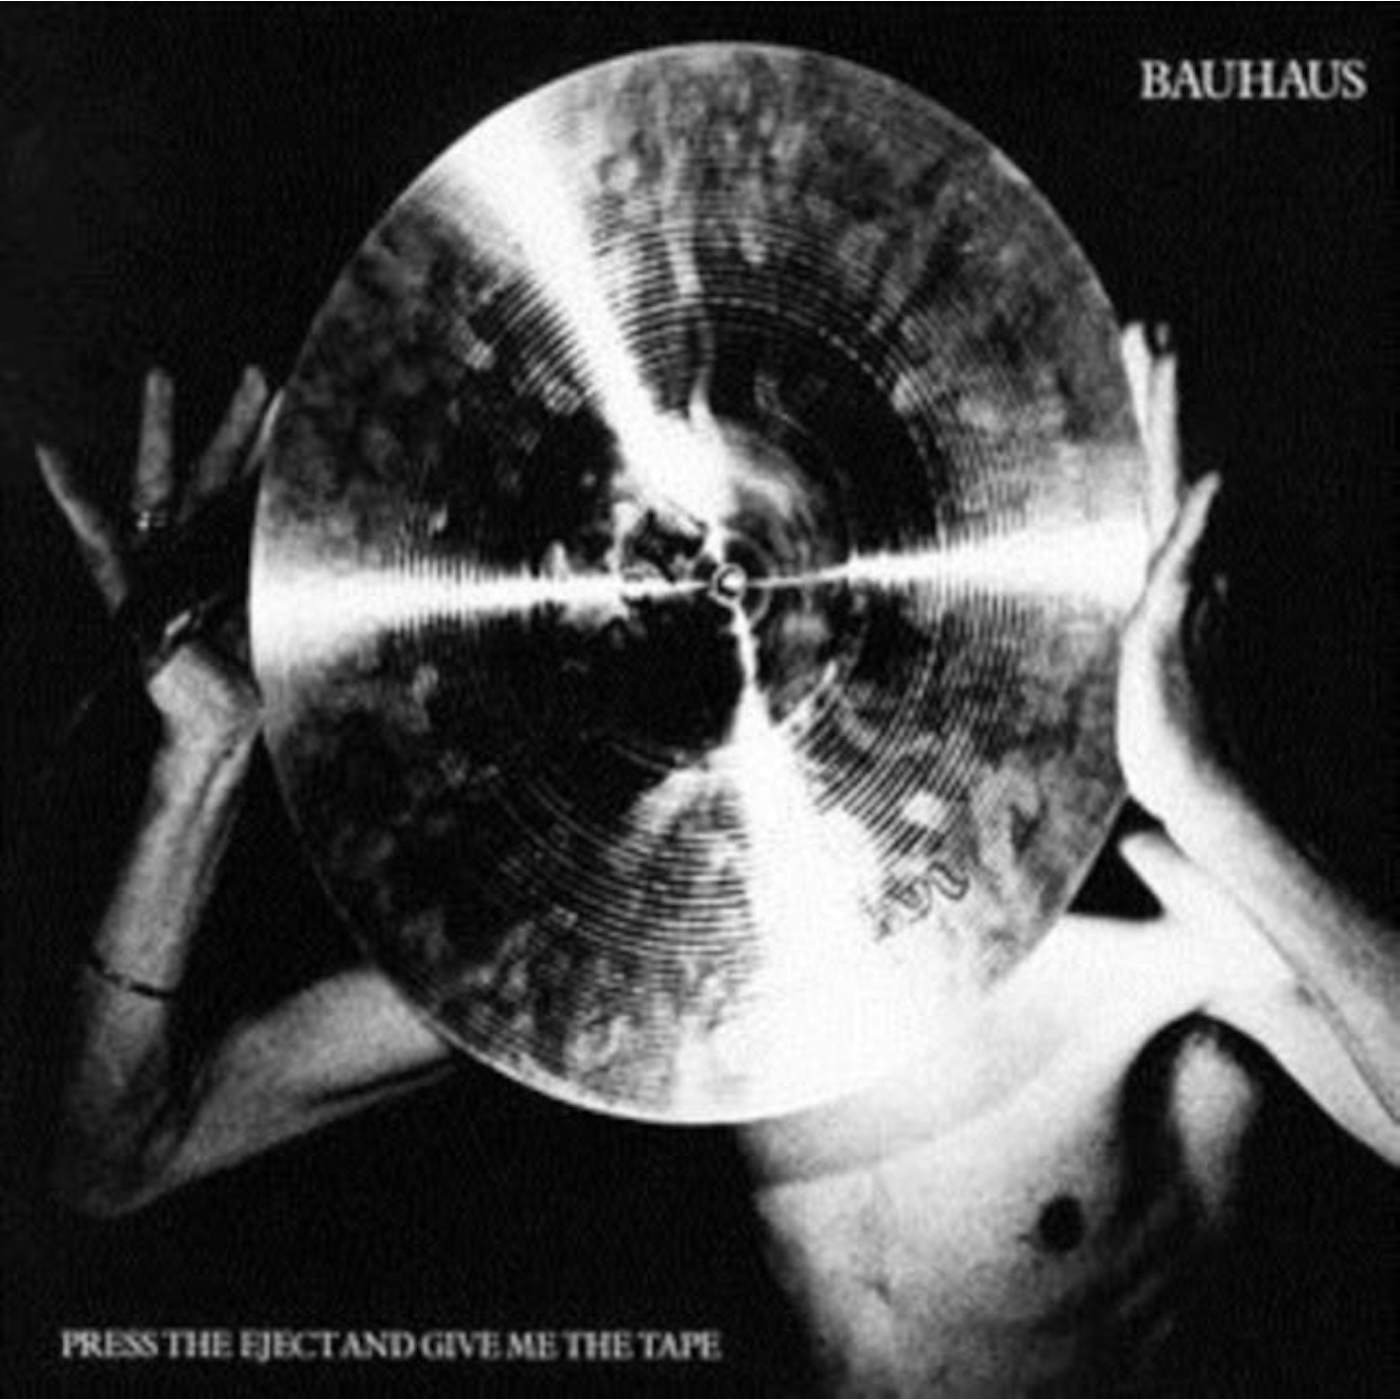 Bauhaus LP Vinyl Record - Press Eject And Give Me The Tape